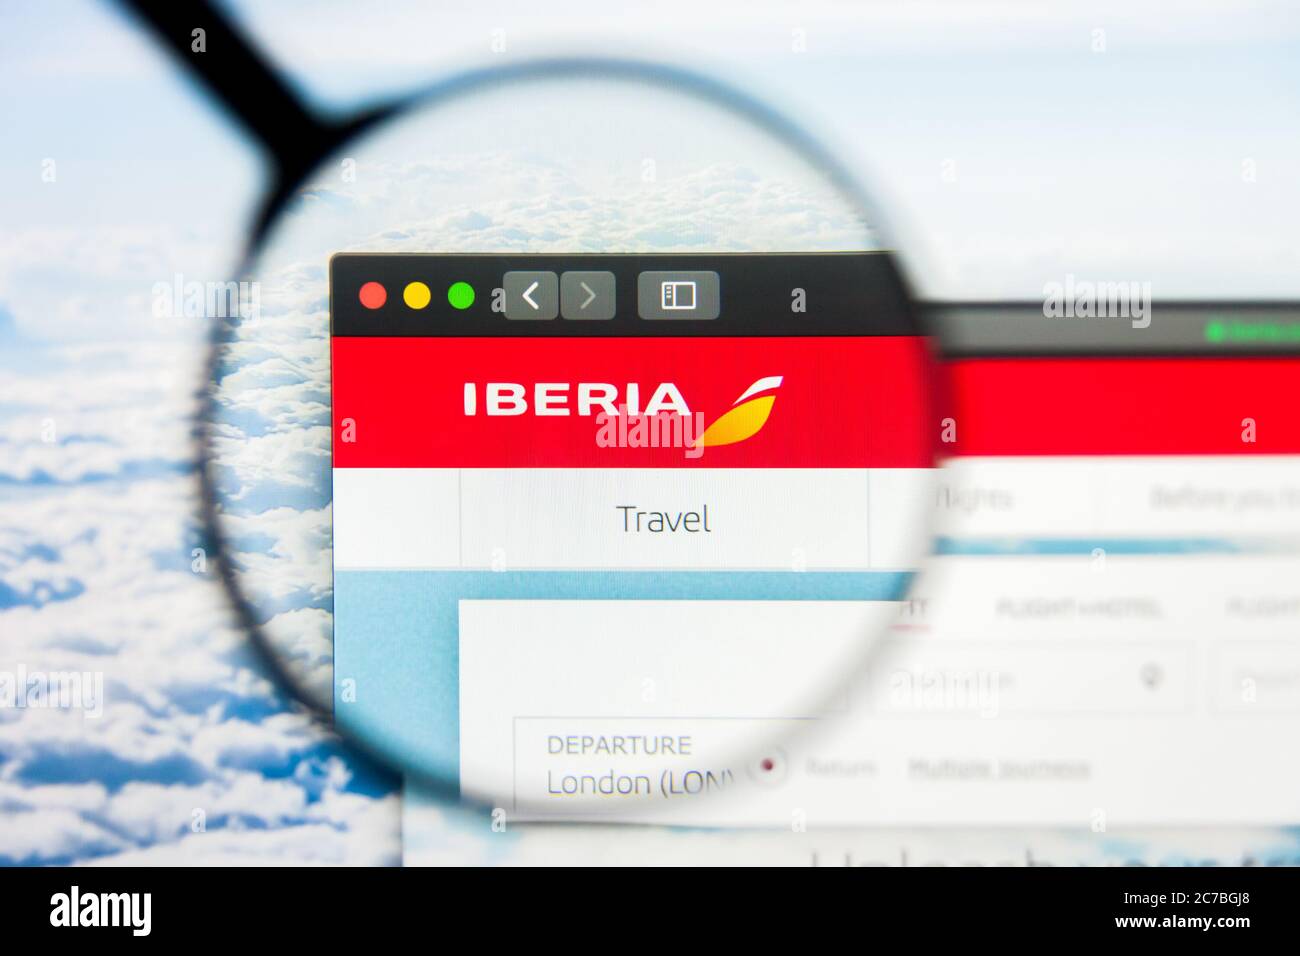 Los Angeles, California, USA - 21 March 2019: Illustrative Editorial of Iberia website homepage. Iberia logo visible on display screen. Stock Photo